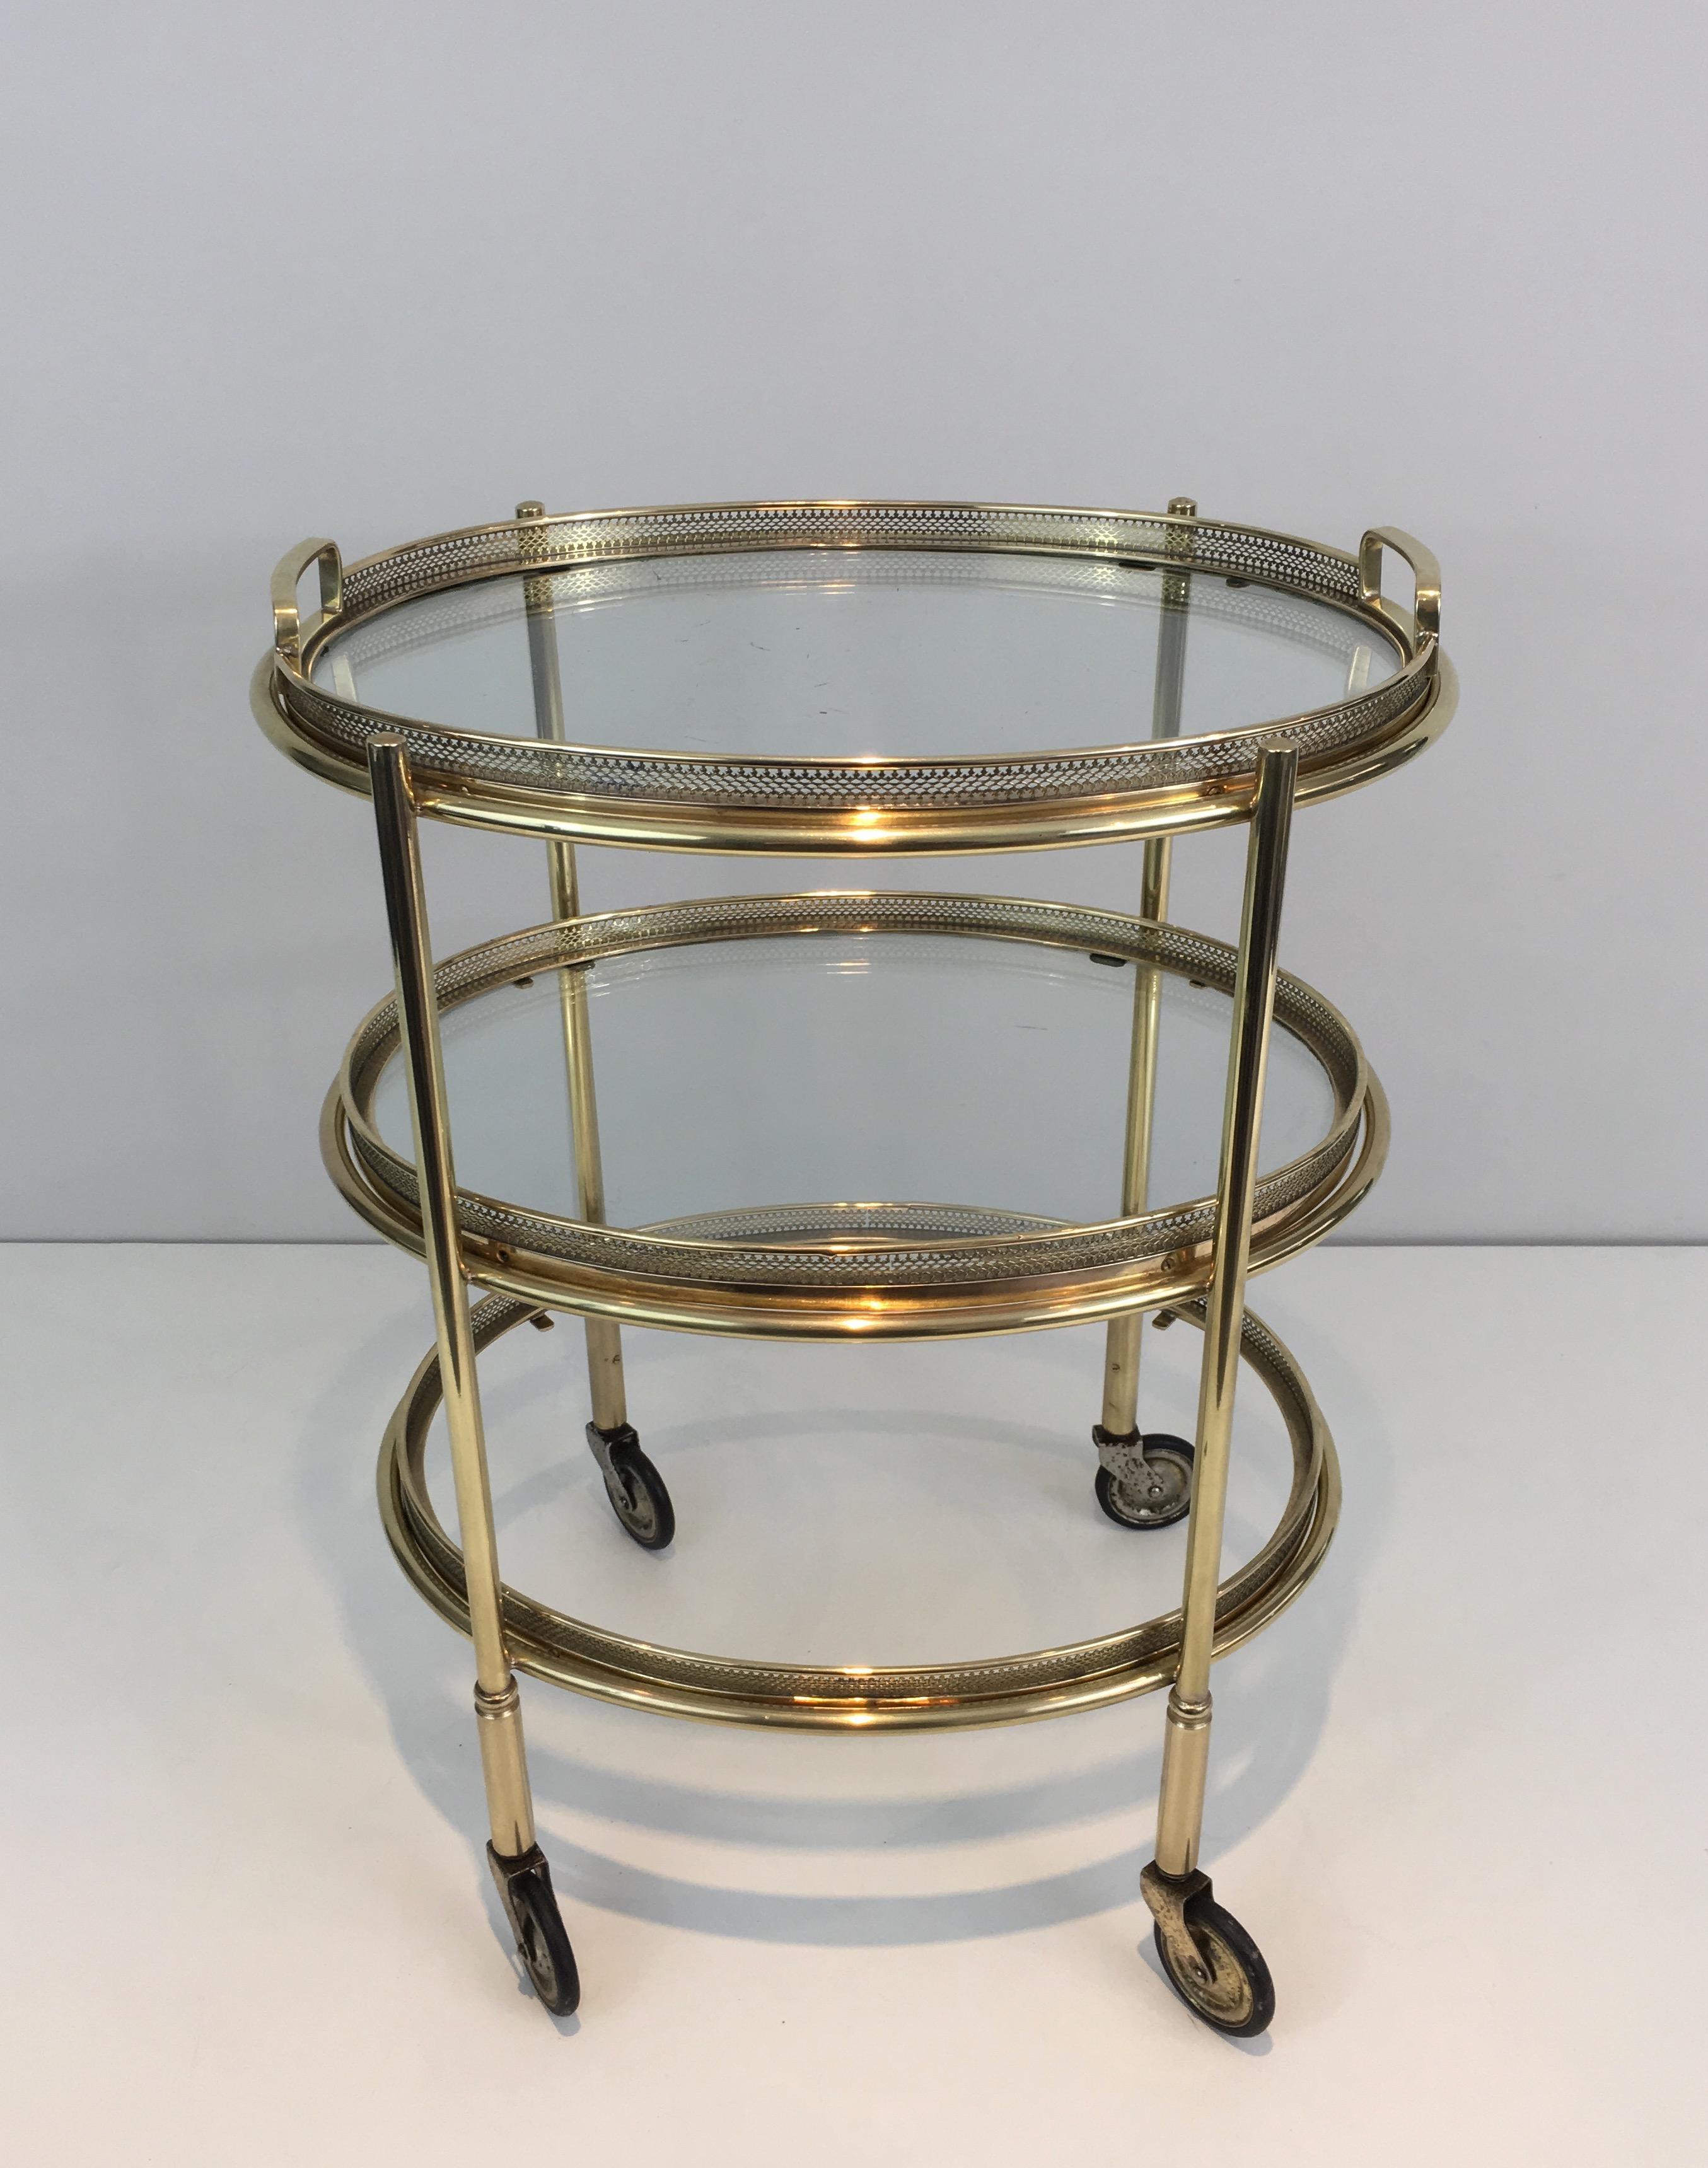 French Delicate Neoclassical Oval Brass Trolley with 3 Removable Shelves